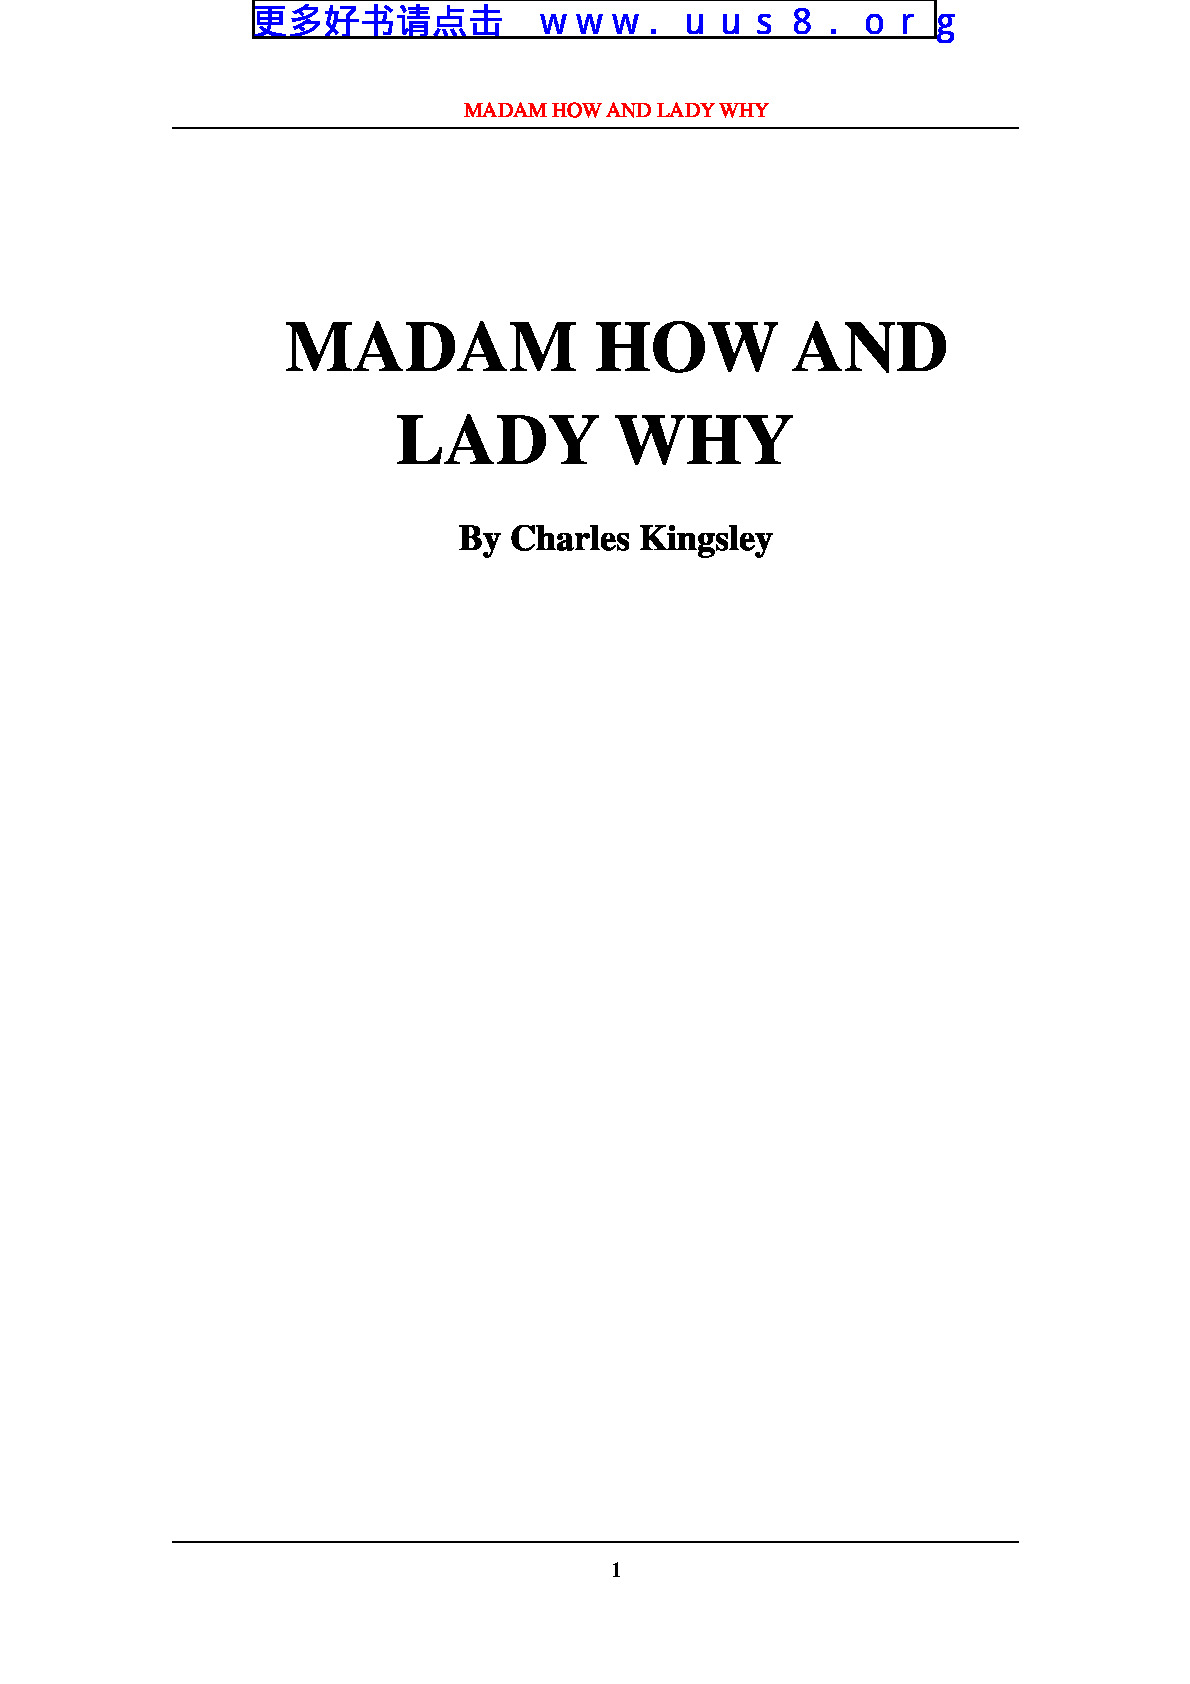 MADAM_HOW_AND_LADY_WHY(豪夫人和怀女士)